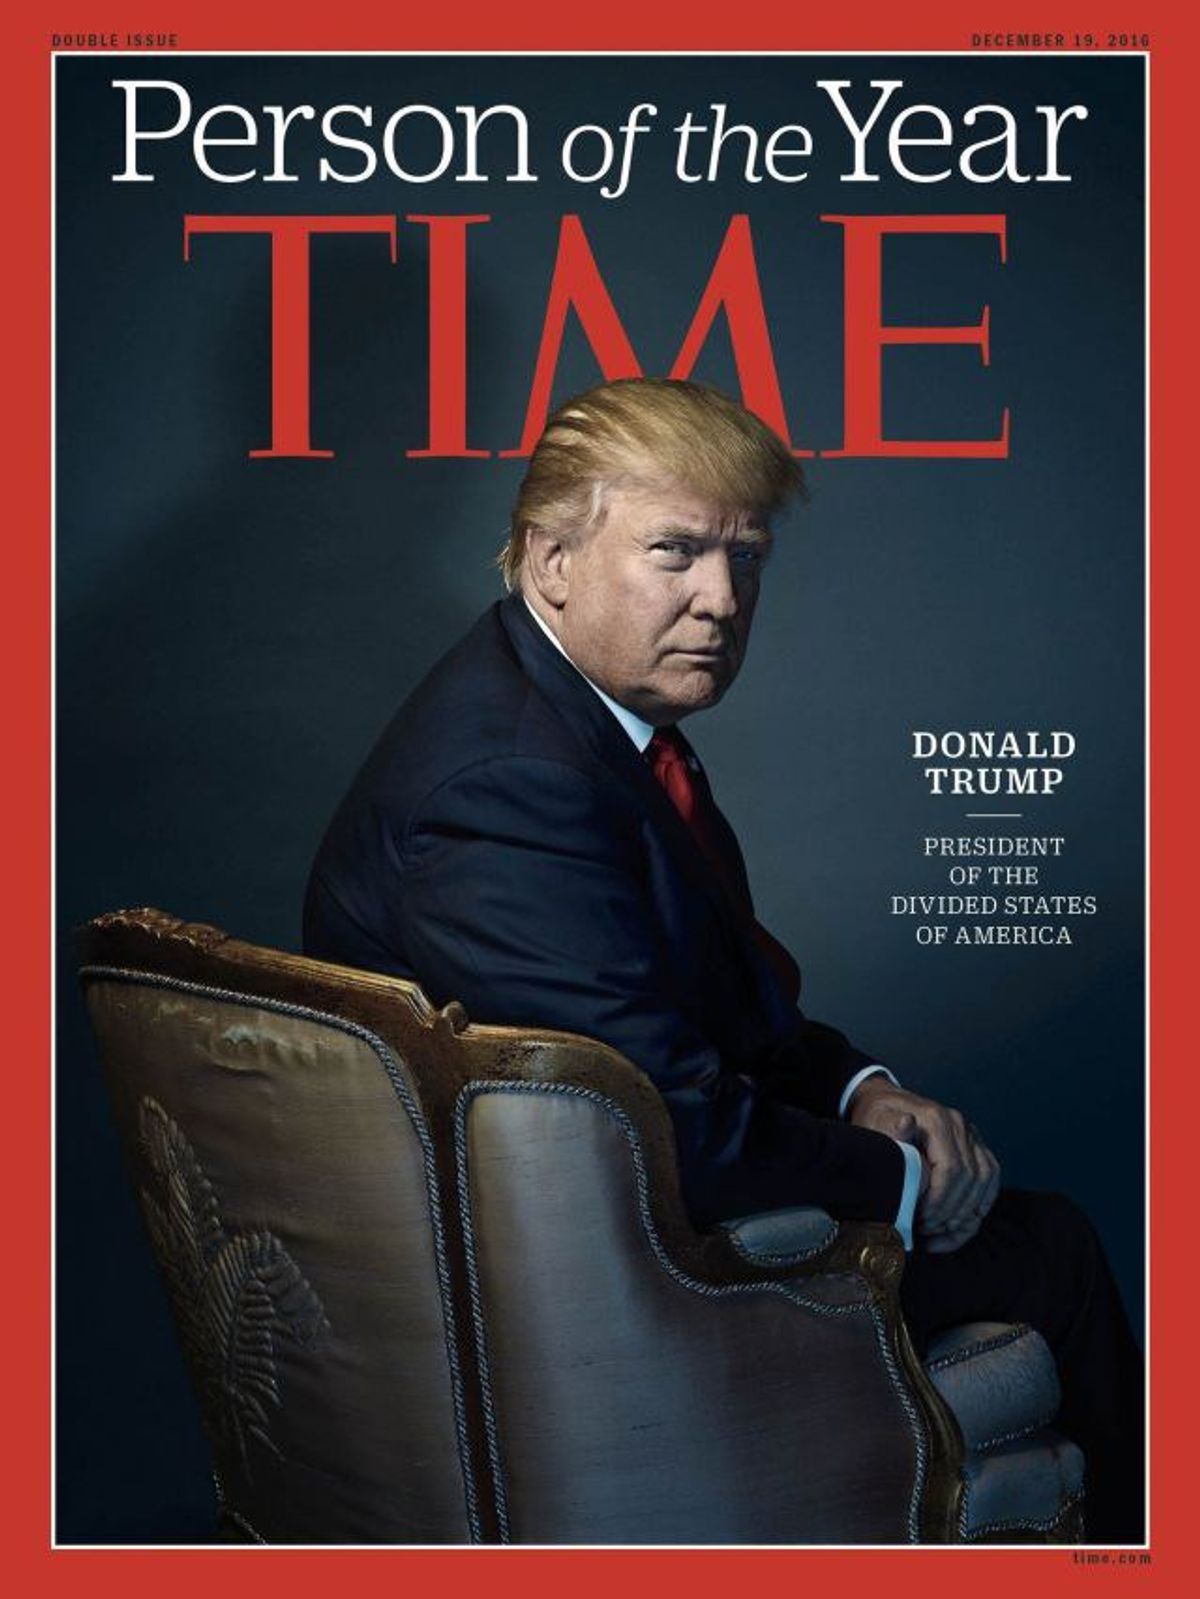 I Won't Congratulate Donald Trump On Person Of The Year